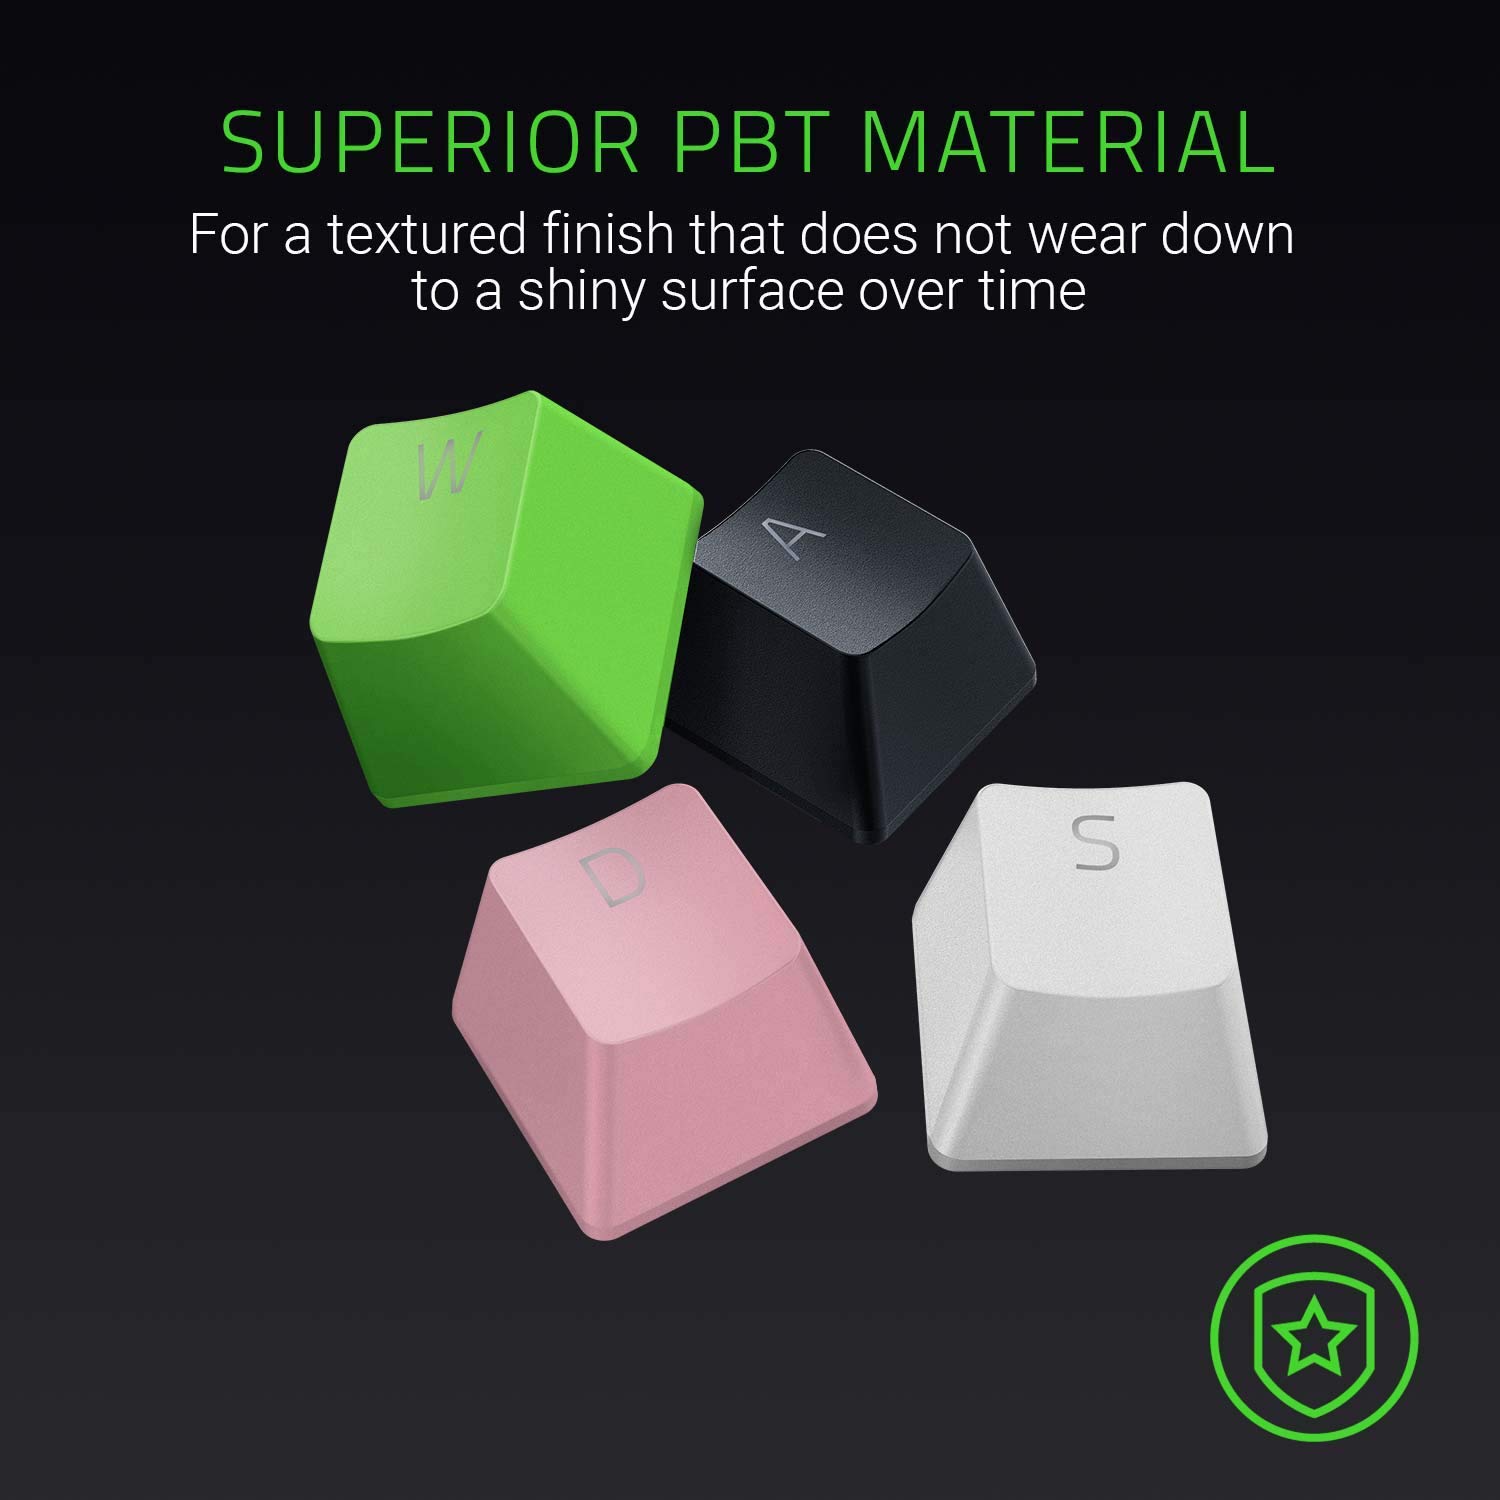 Razer PBT Keycap Upgrade Set - Backlight Compatible (Superior PBT Shine Resistant Material, Doubleshot Molding with Ultra Thin Font) Mercury